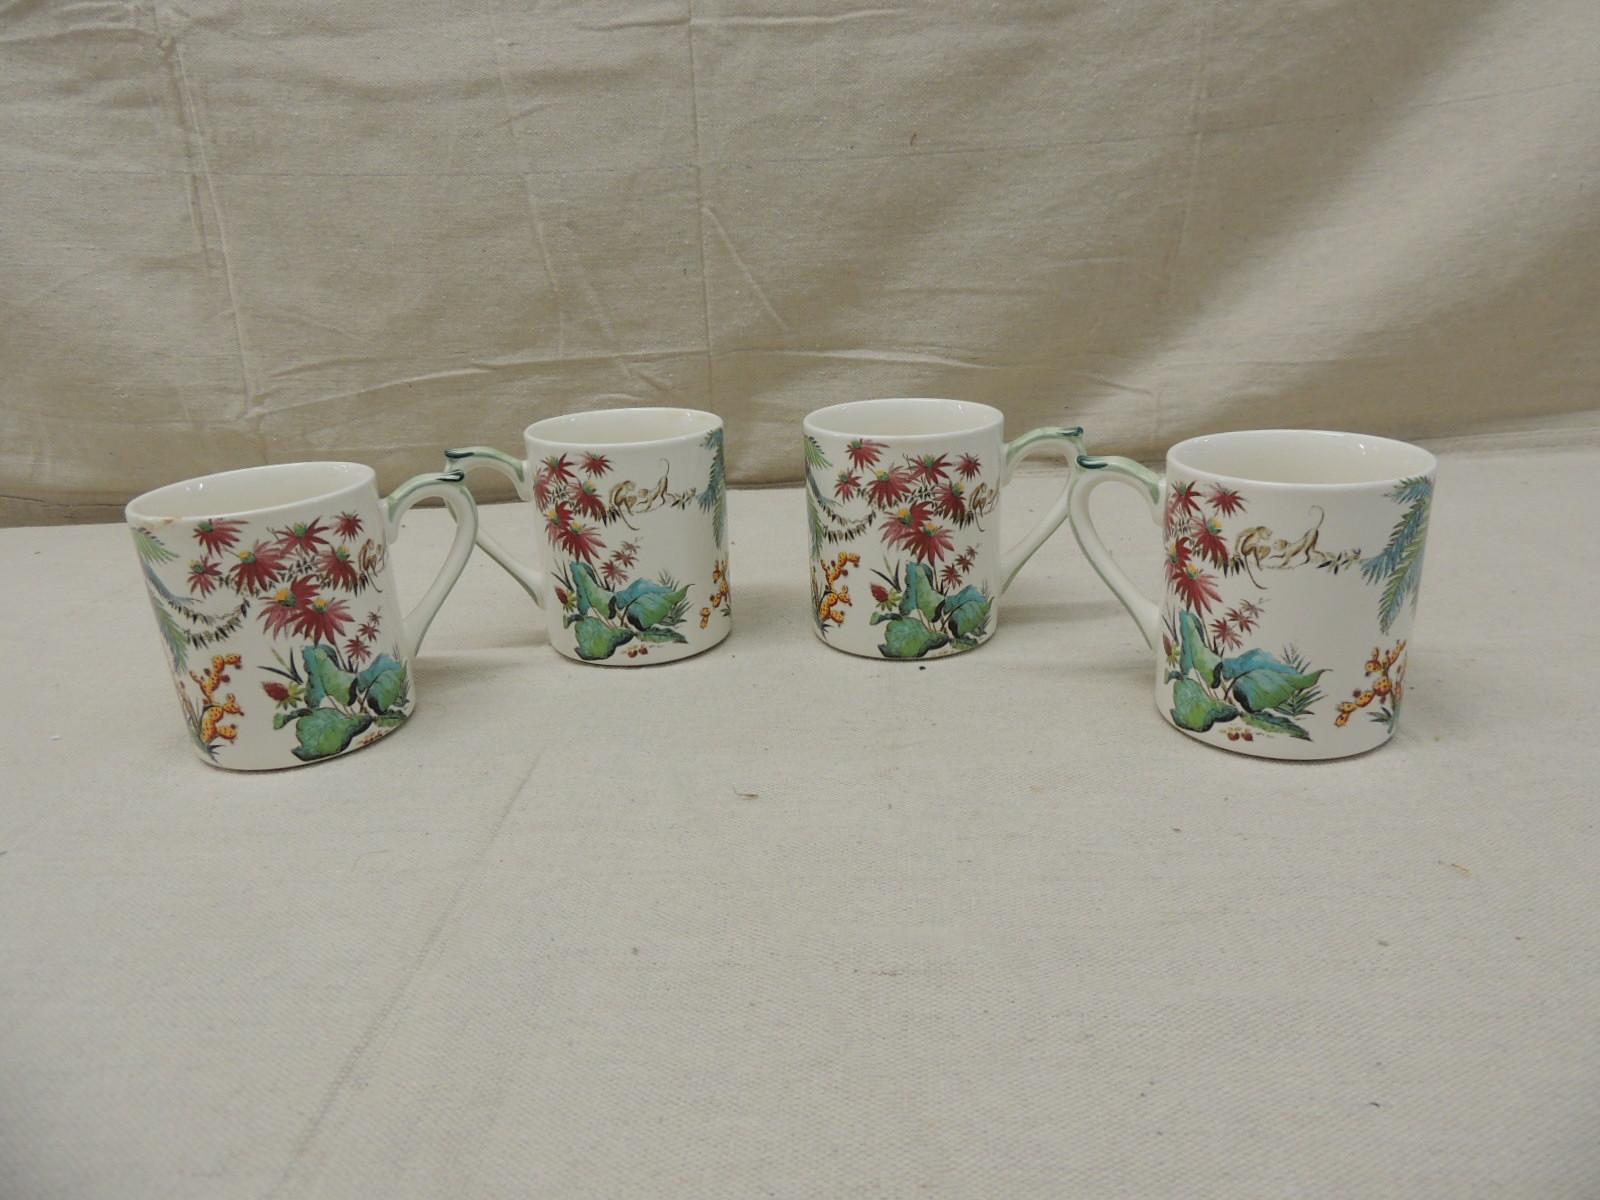 Set of four (4) Gien France Tamarin (Monkey) vintage mugs
Located near the Loire Valley castles, the Faïencerie de Gien has been synonymous with prestigious faience tableware and decorative objects since its founding in 1821. Gien pieces are